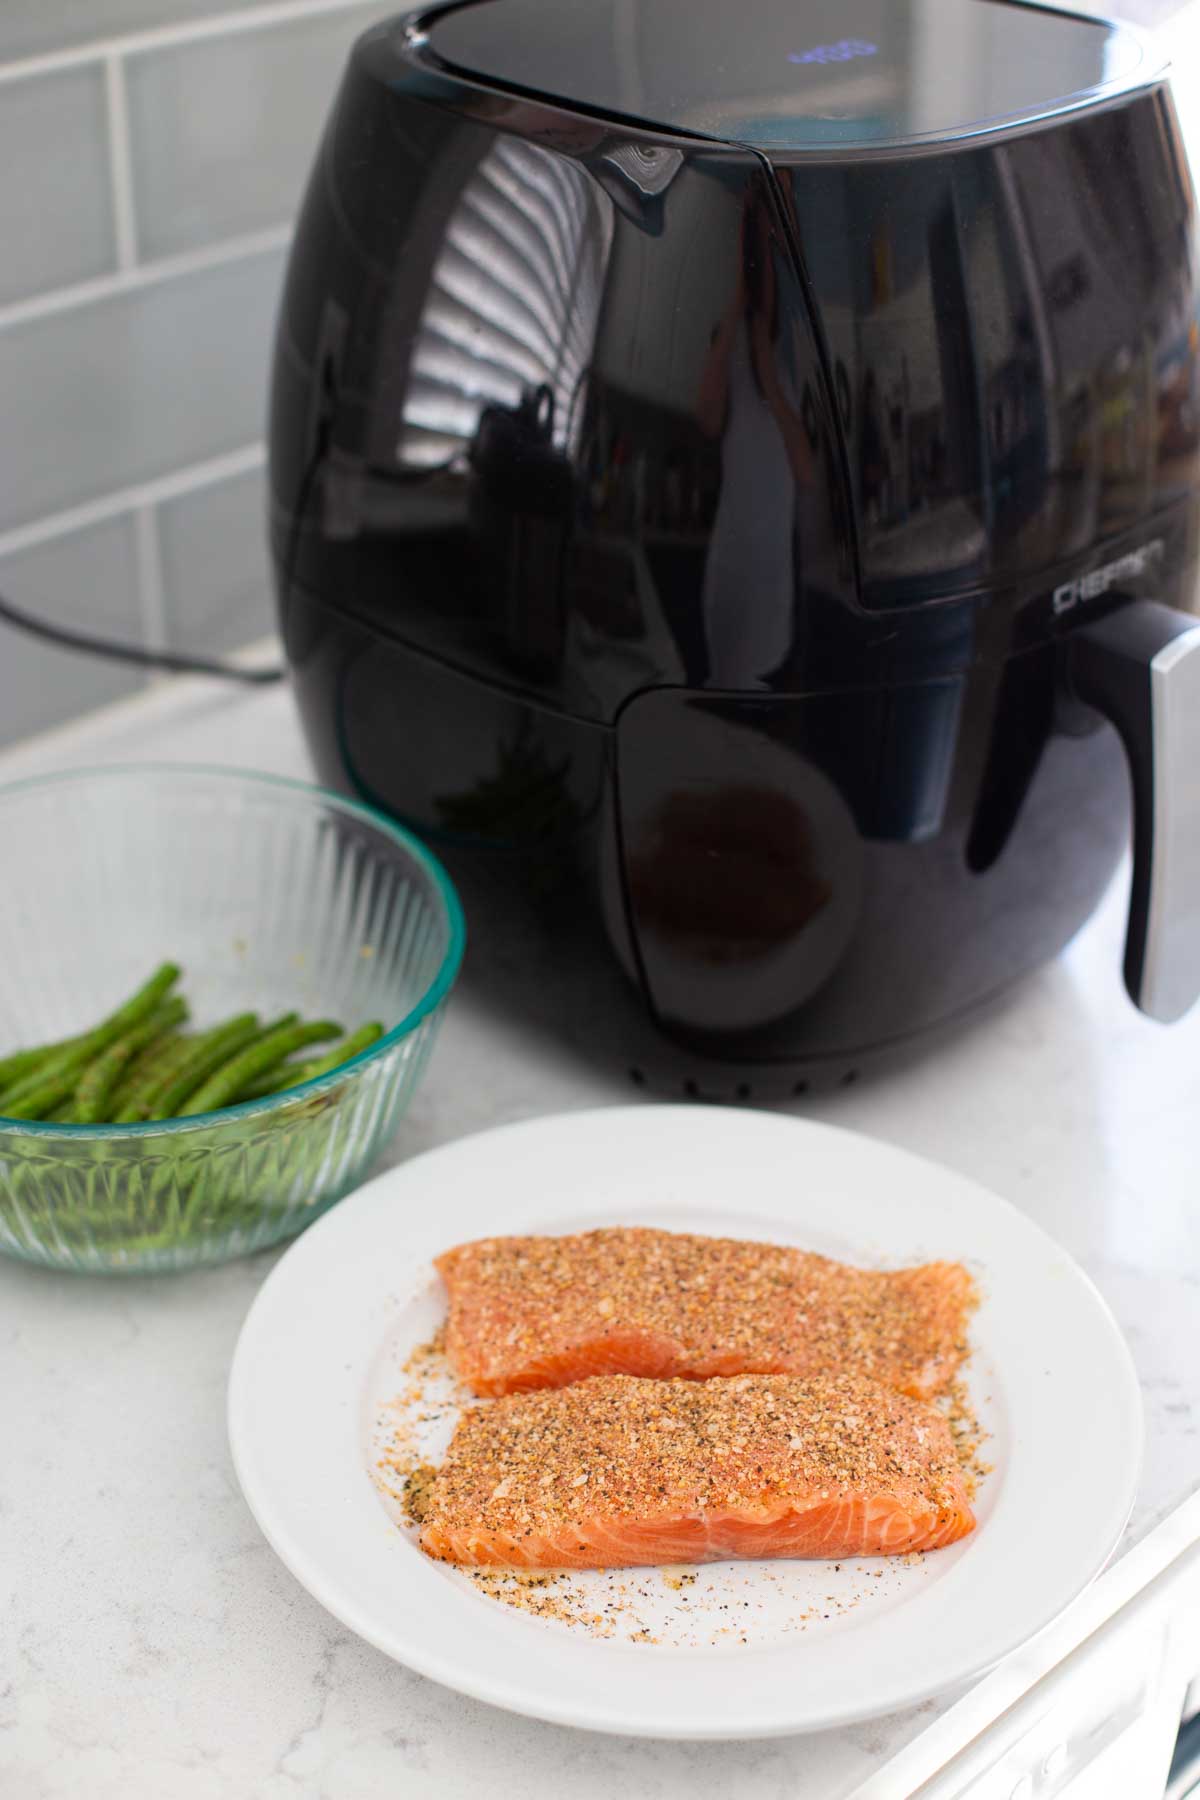 The salmon and prepared green beans are sitting next to the air fryer.